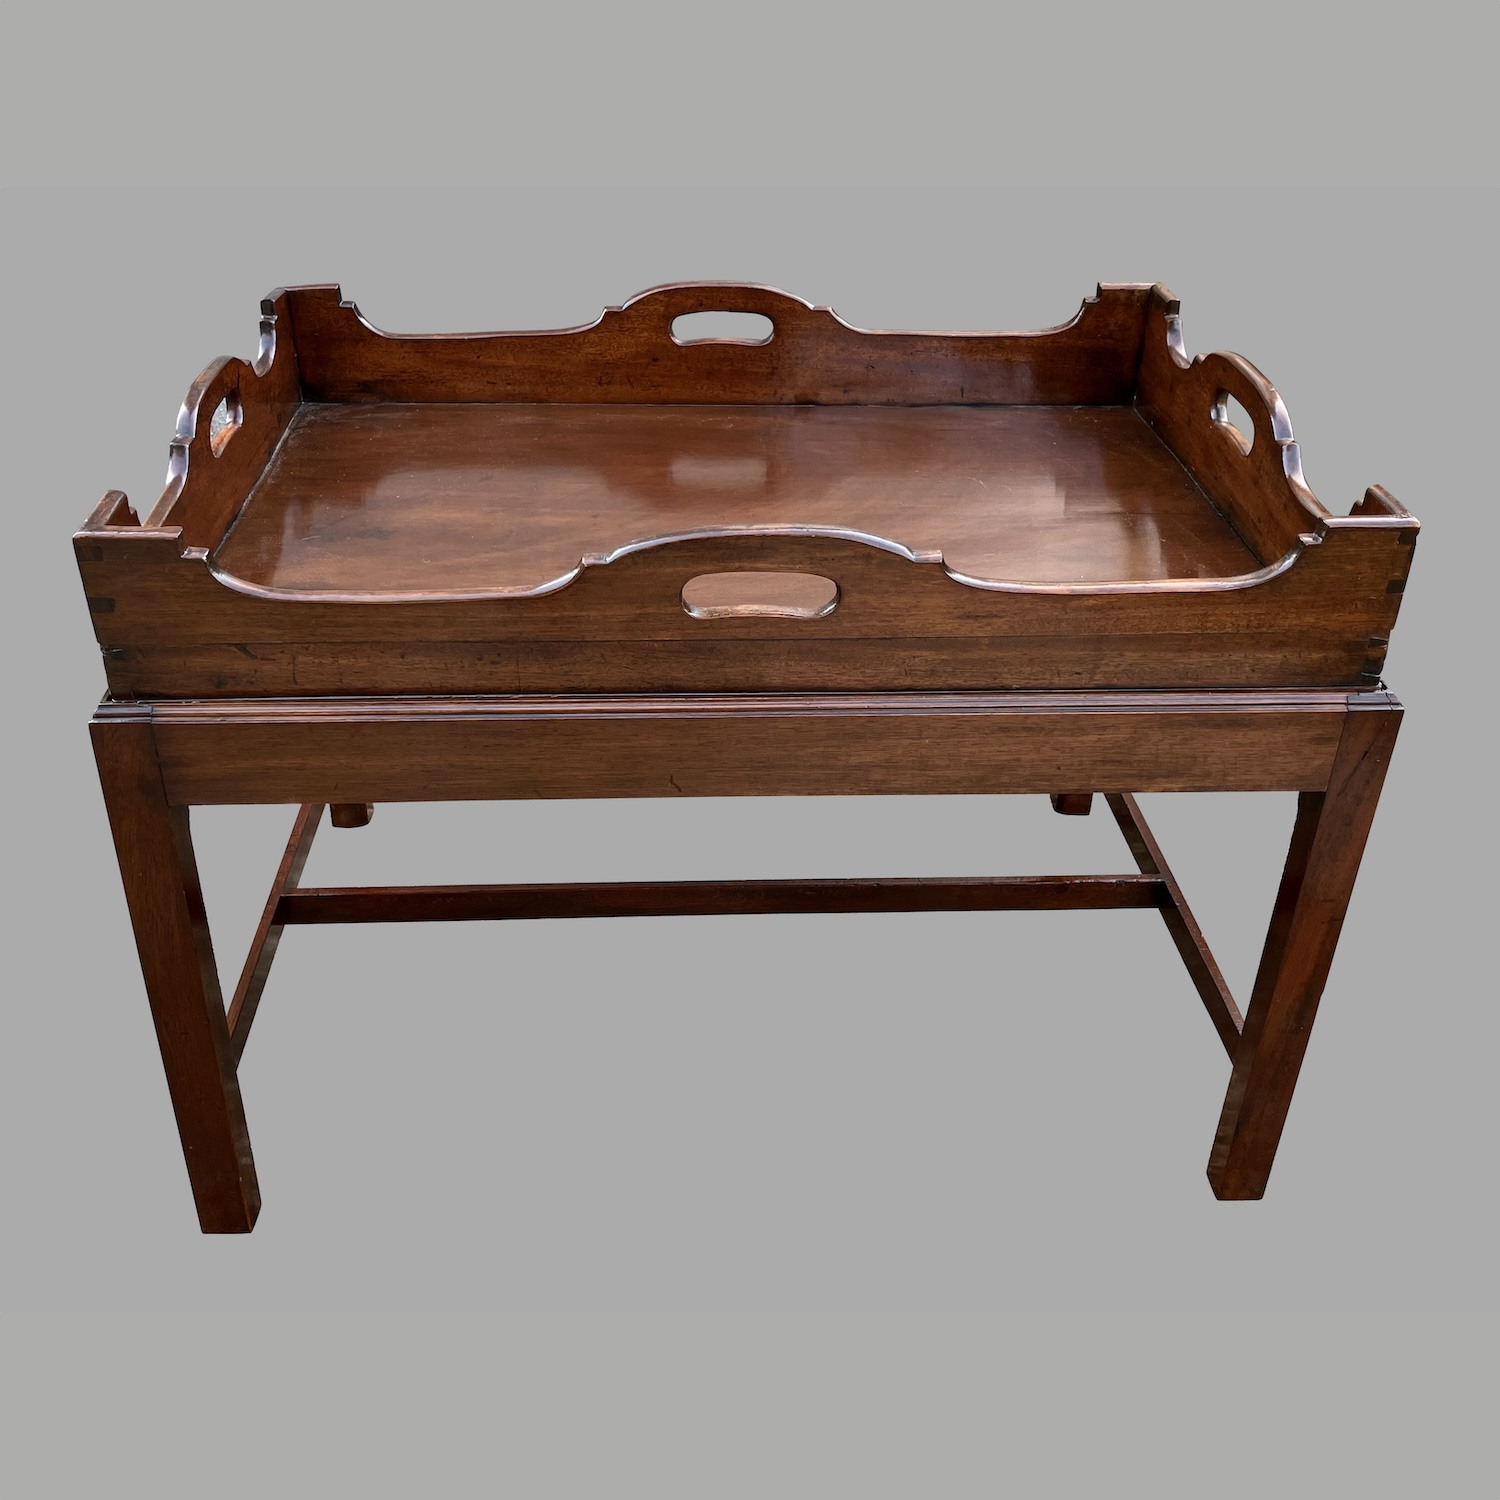 georgian-style-mahogany-butlers-table-on-later-custom-stand-f1223-3